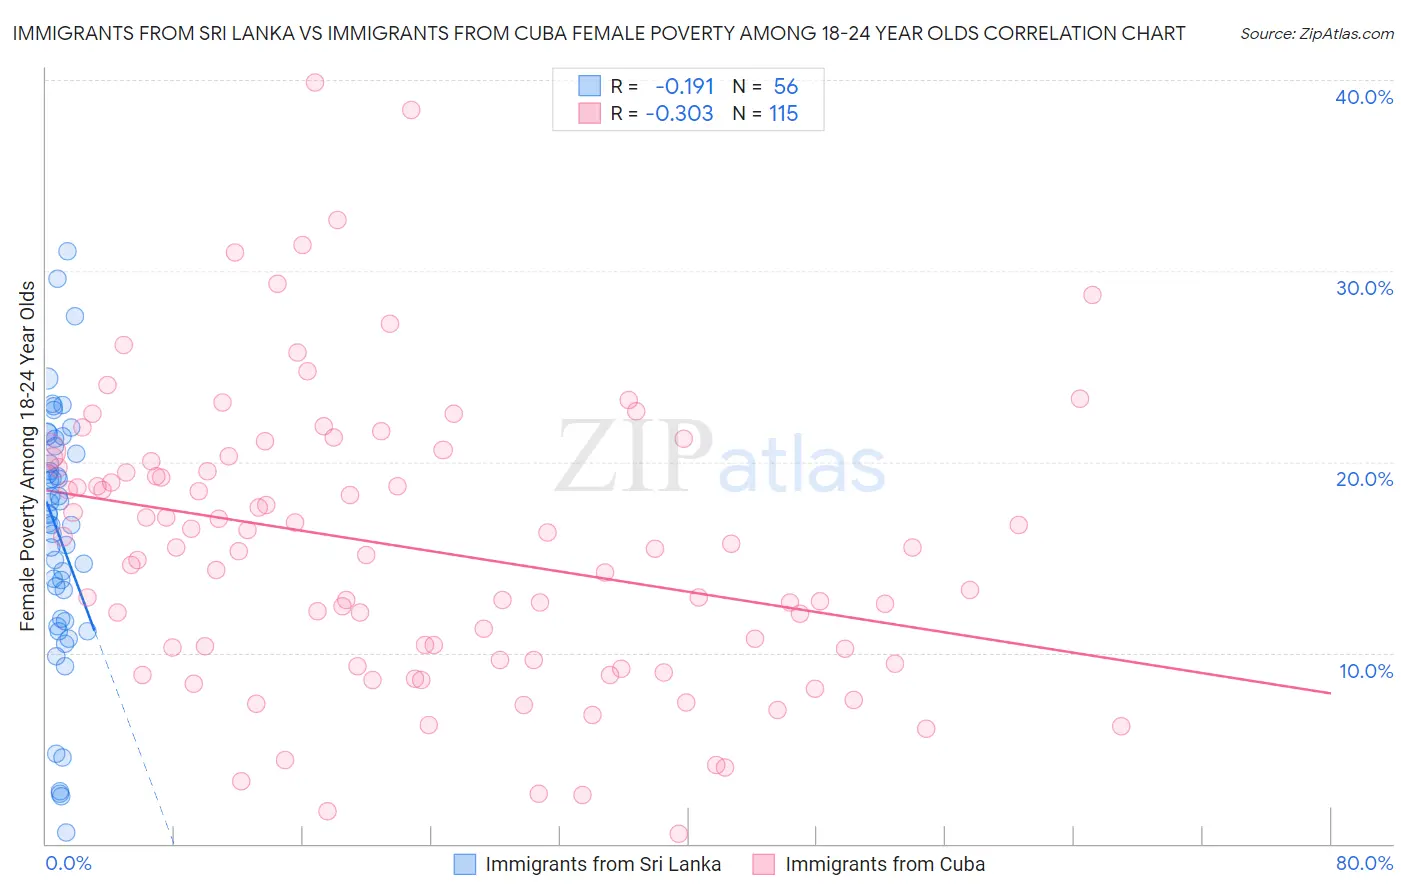 Immigrants from Sri Lanka vs Immigrants from Cuba Female Poverty Among 18-24 Year Olds